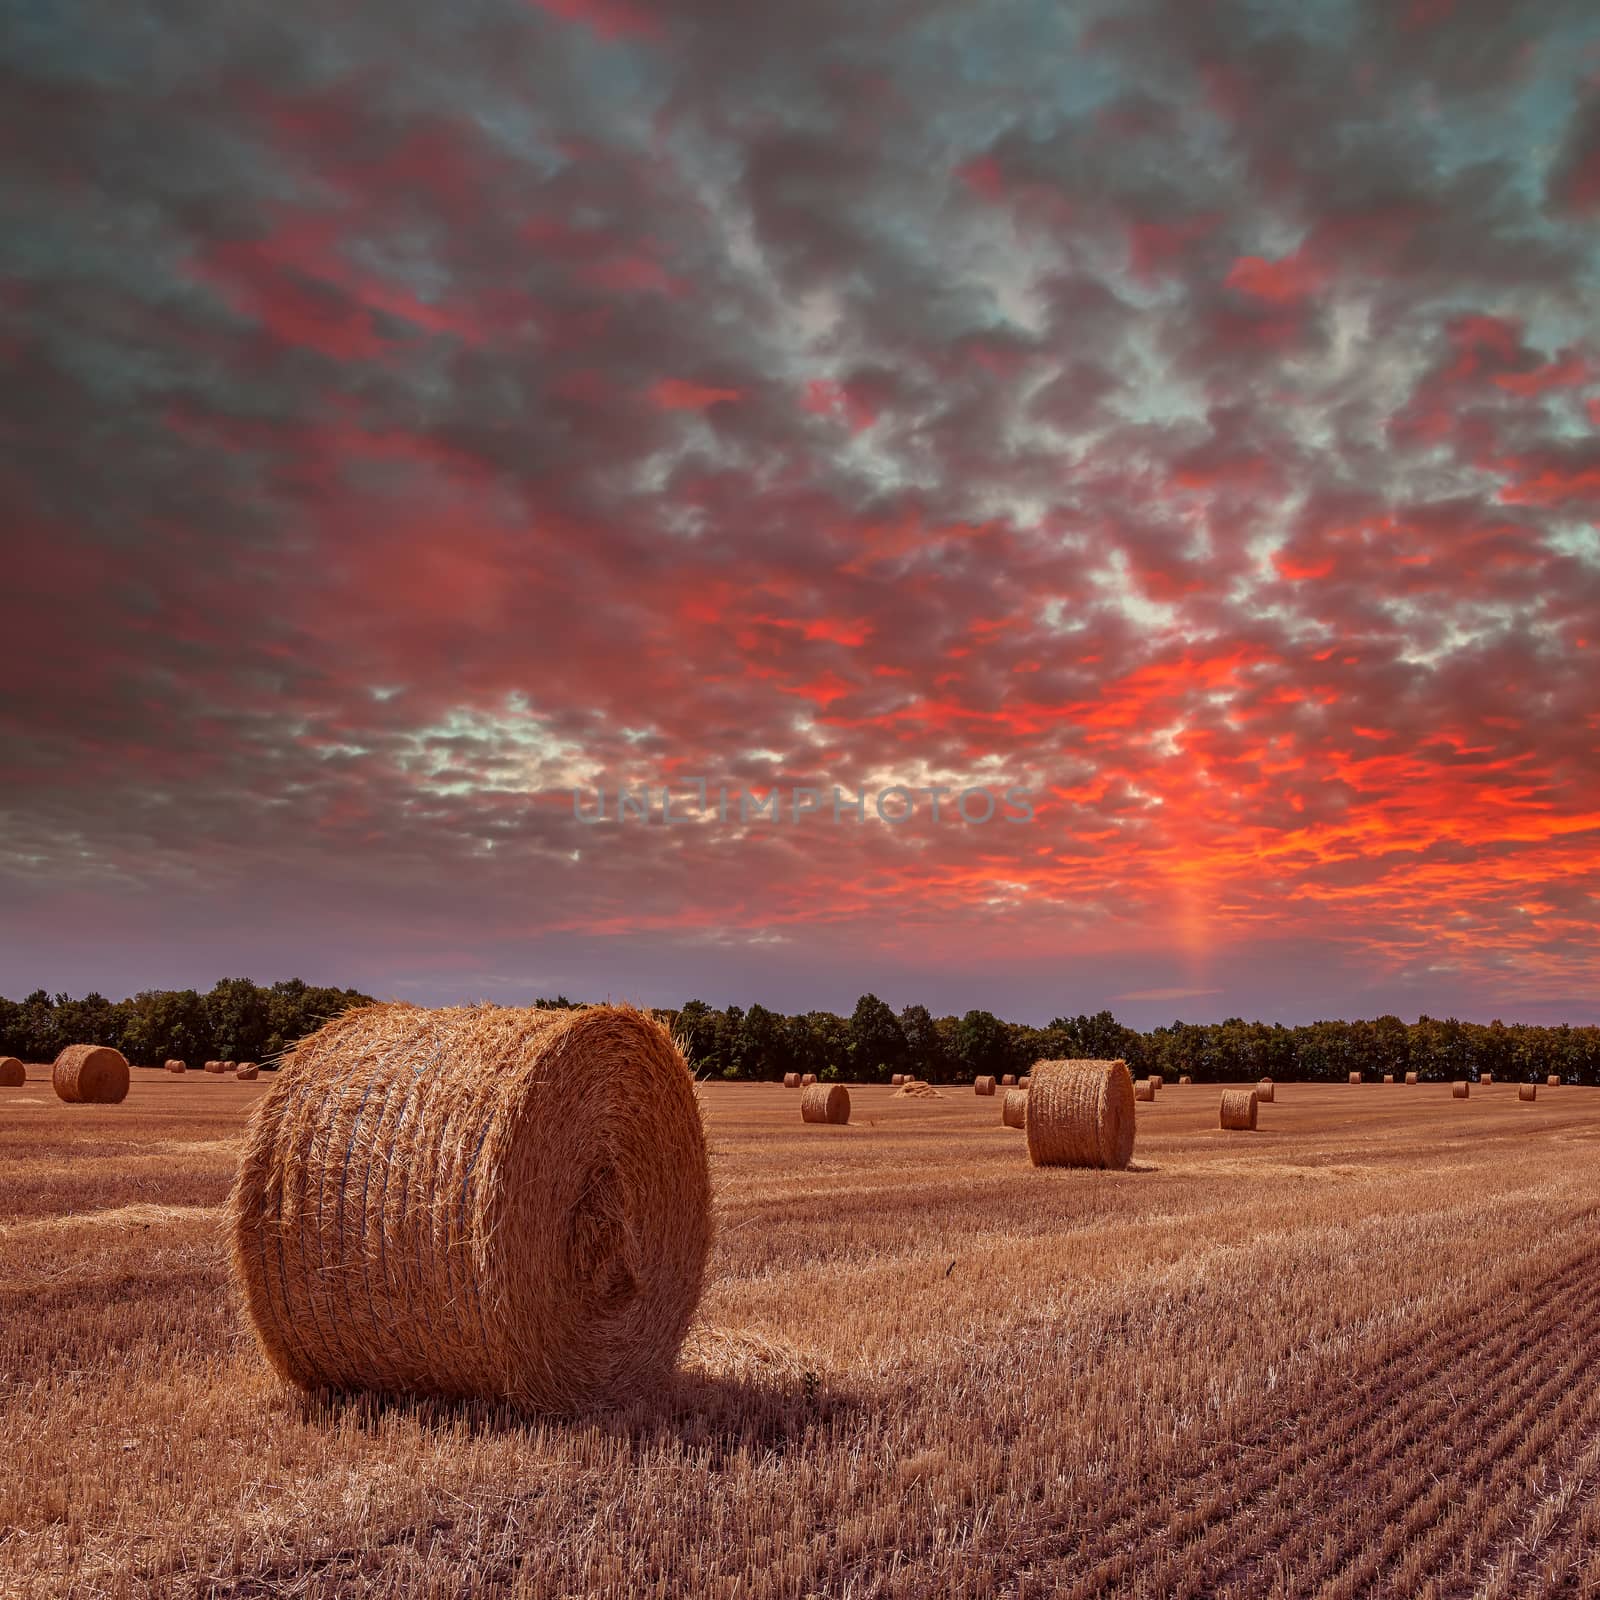 Field with haystacks on sunset by firewings